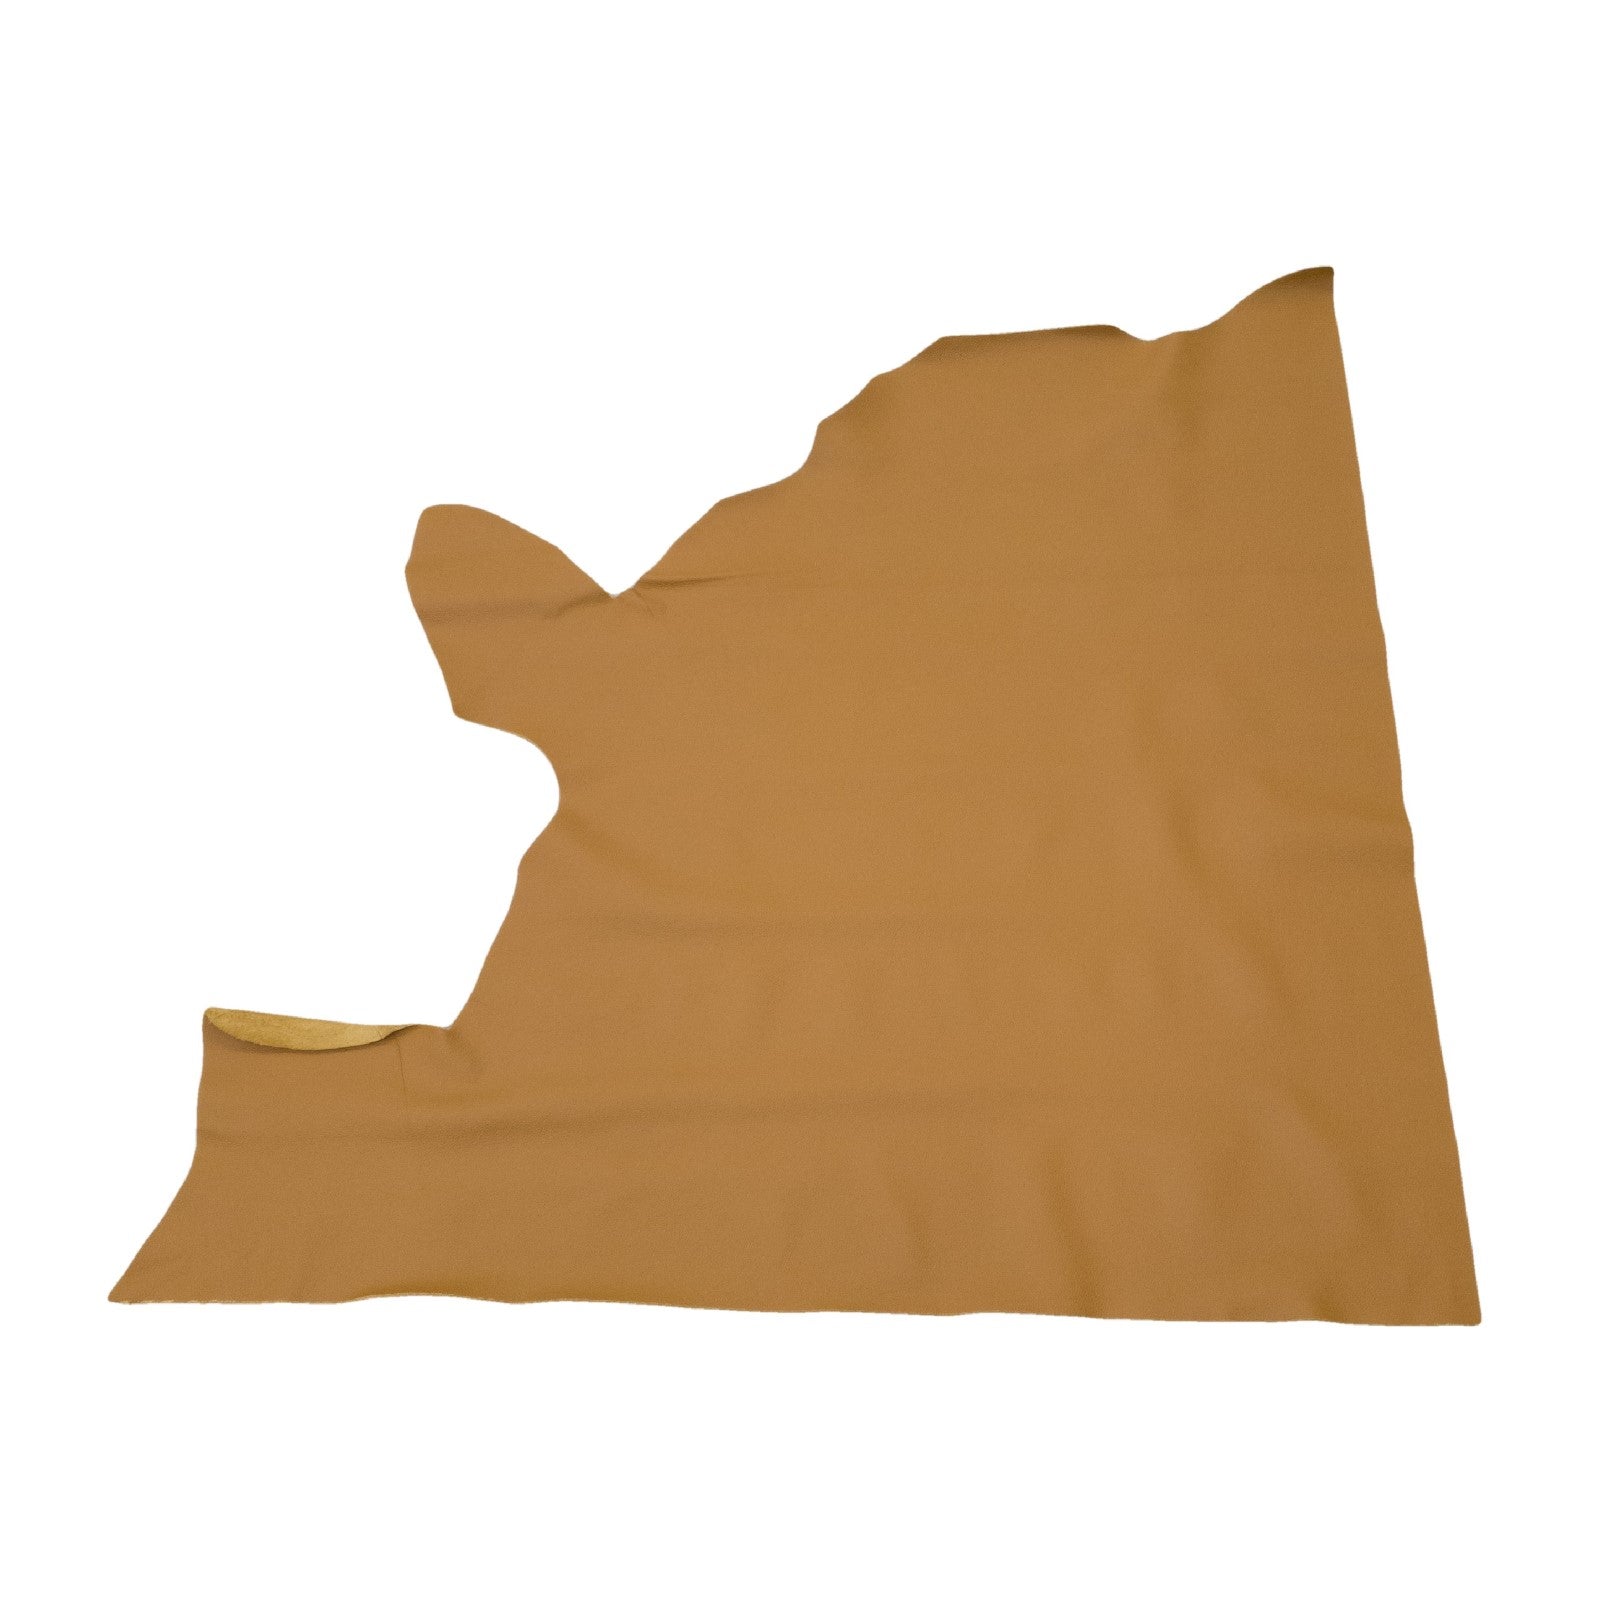 Sweet Caramel, 5.5-23 Sq Ft, 2.5-3 oz Cow Hides, Vital Upholstery Collection, Top Piece / 5.5-6.5 | The Leather Guy